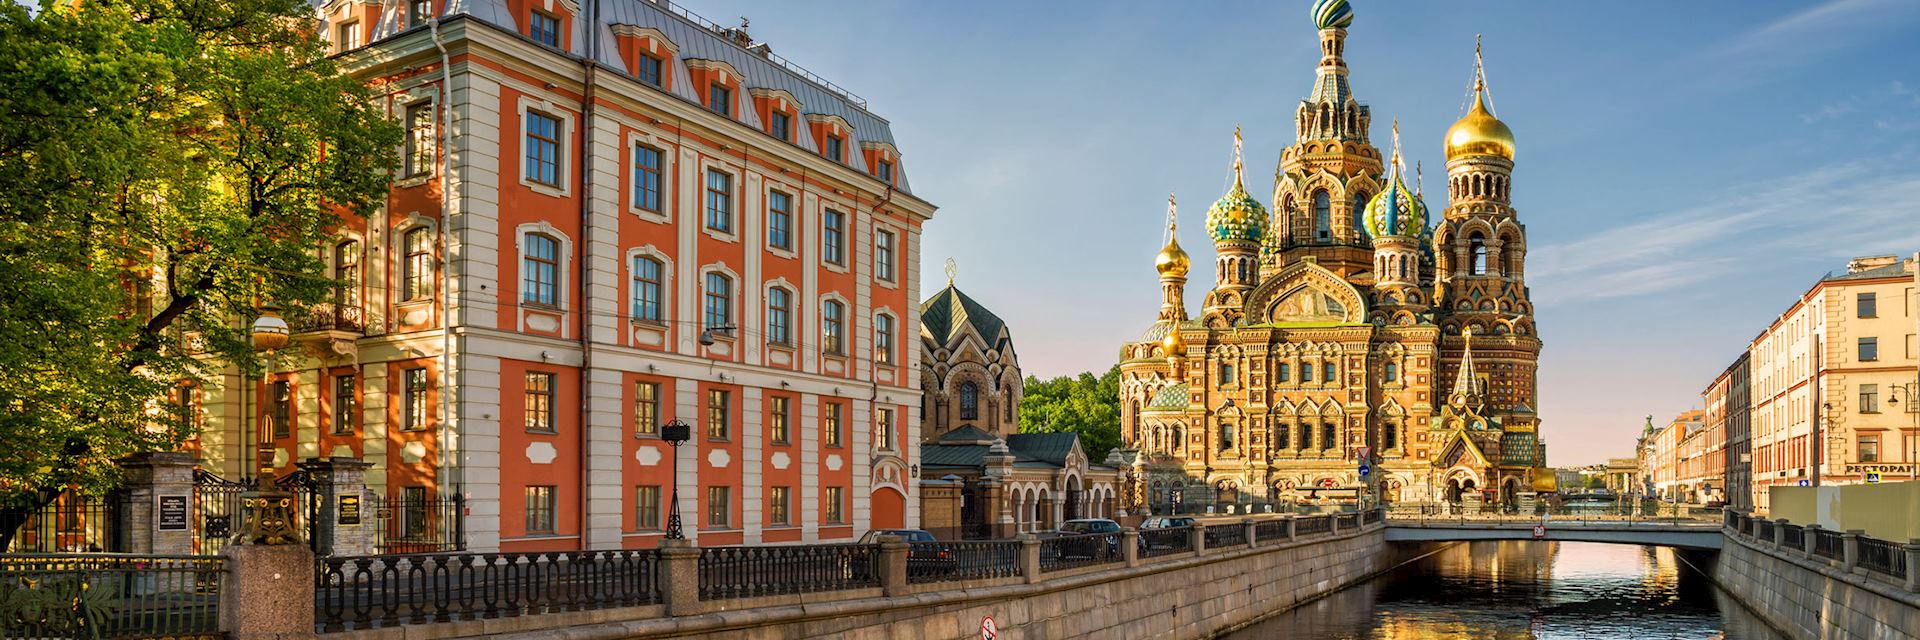 Church of the Savior on Spilled Blood, St Petersburg